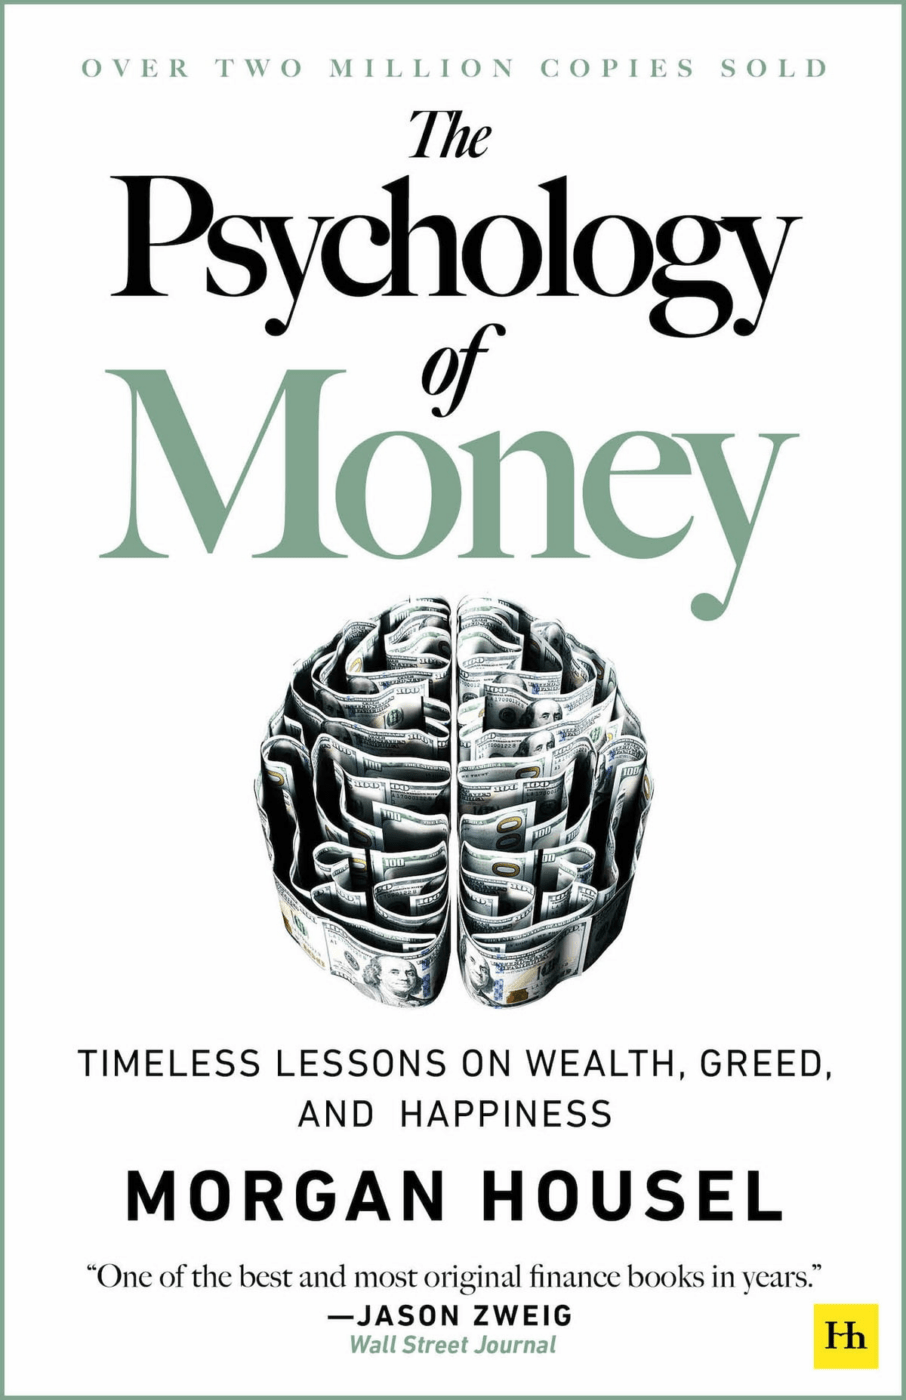 The Psychology of Money Book Summary at a Glance